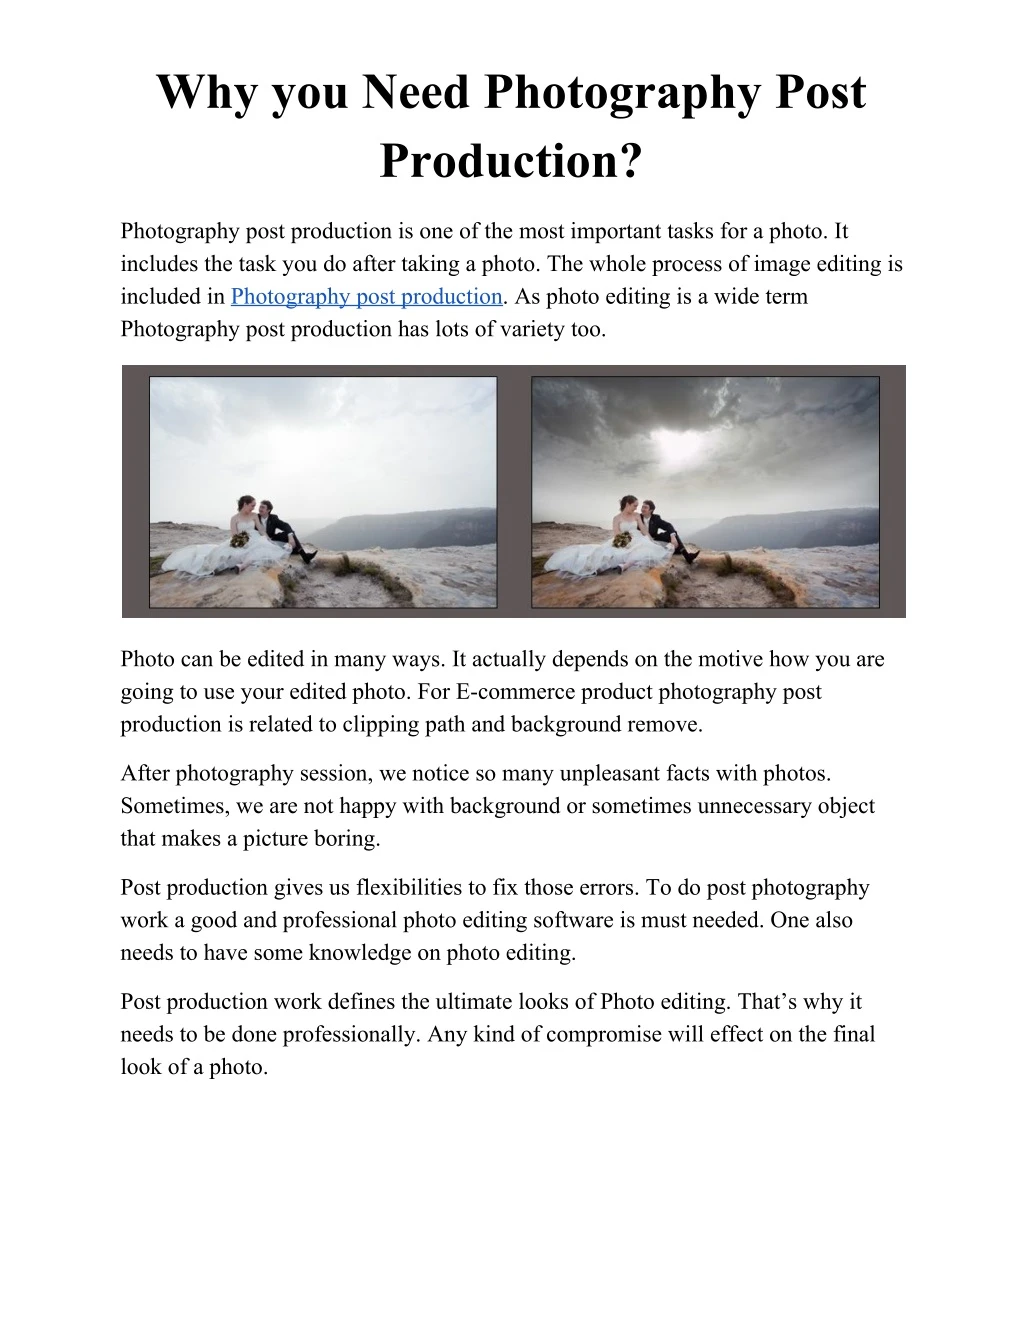 why you need photography post production